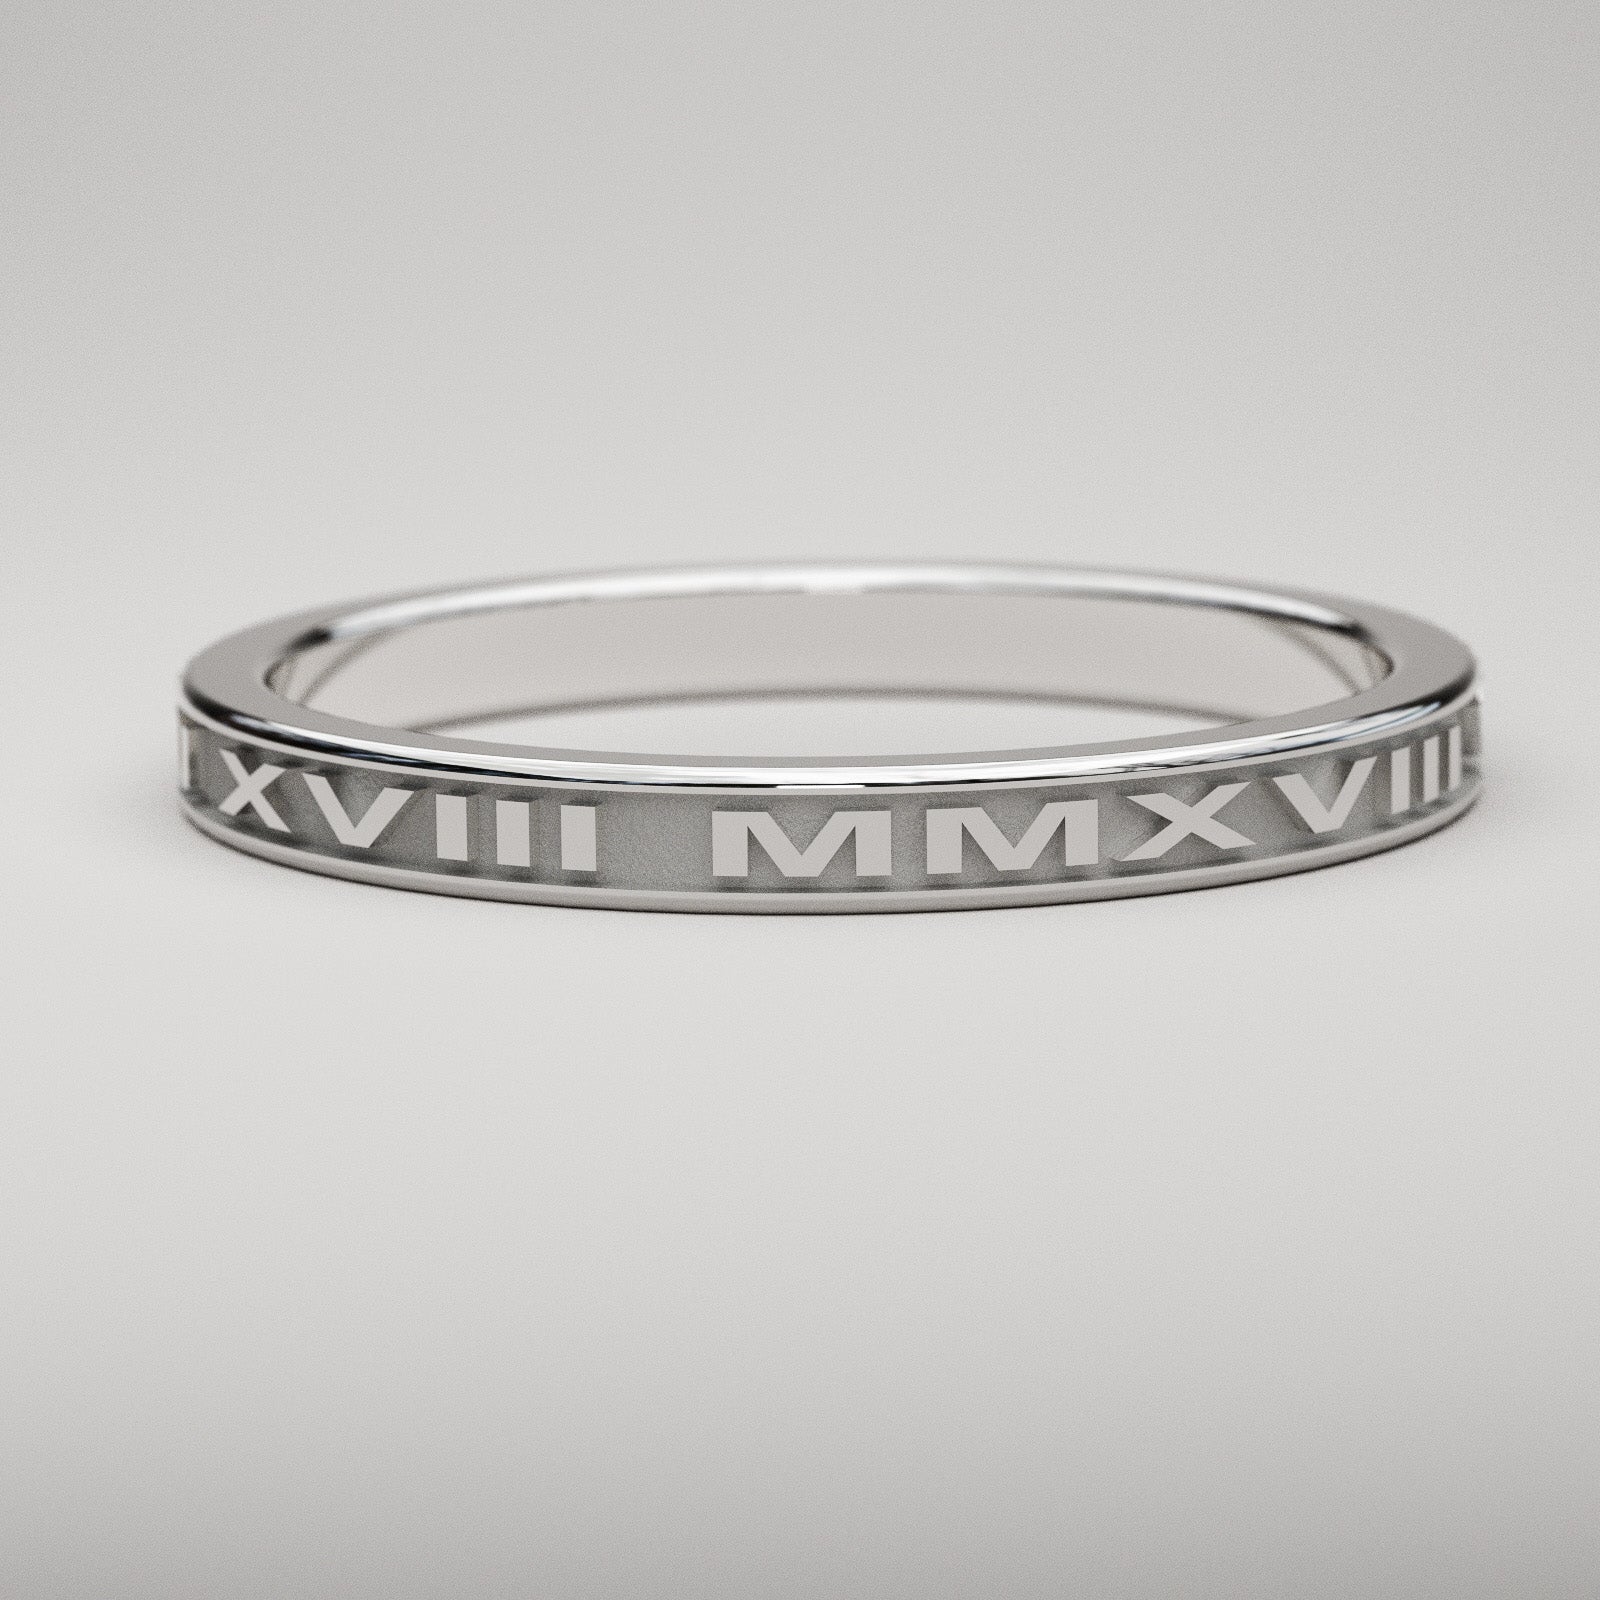 Classic Roman Numeral Stainless Steel Ring - Rock & Spark